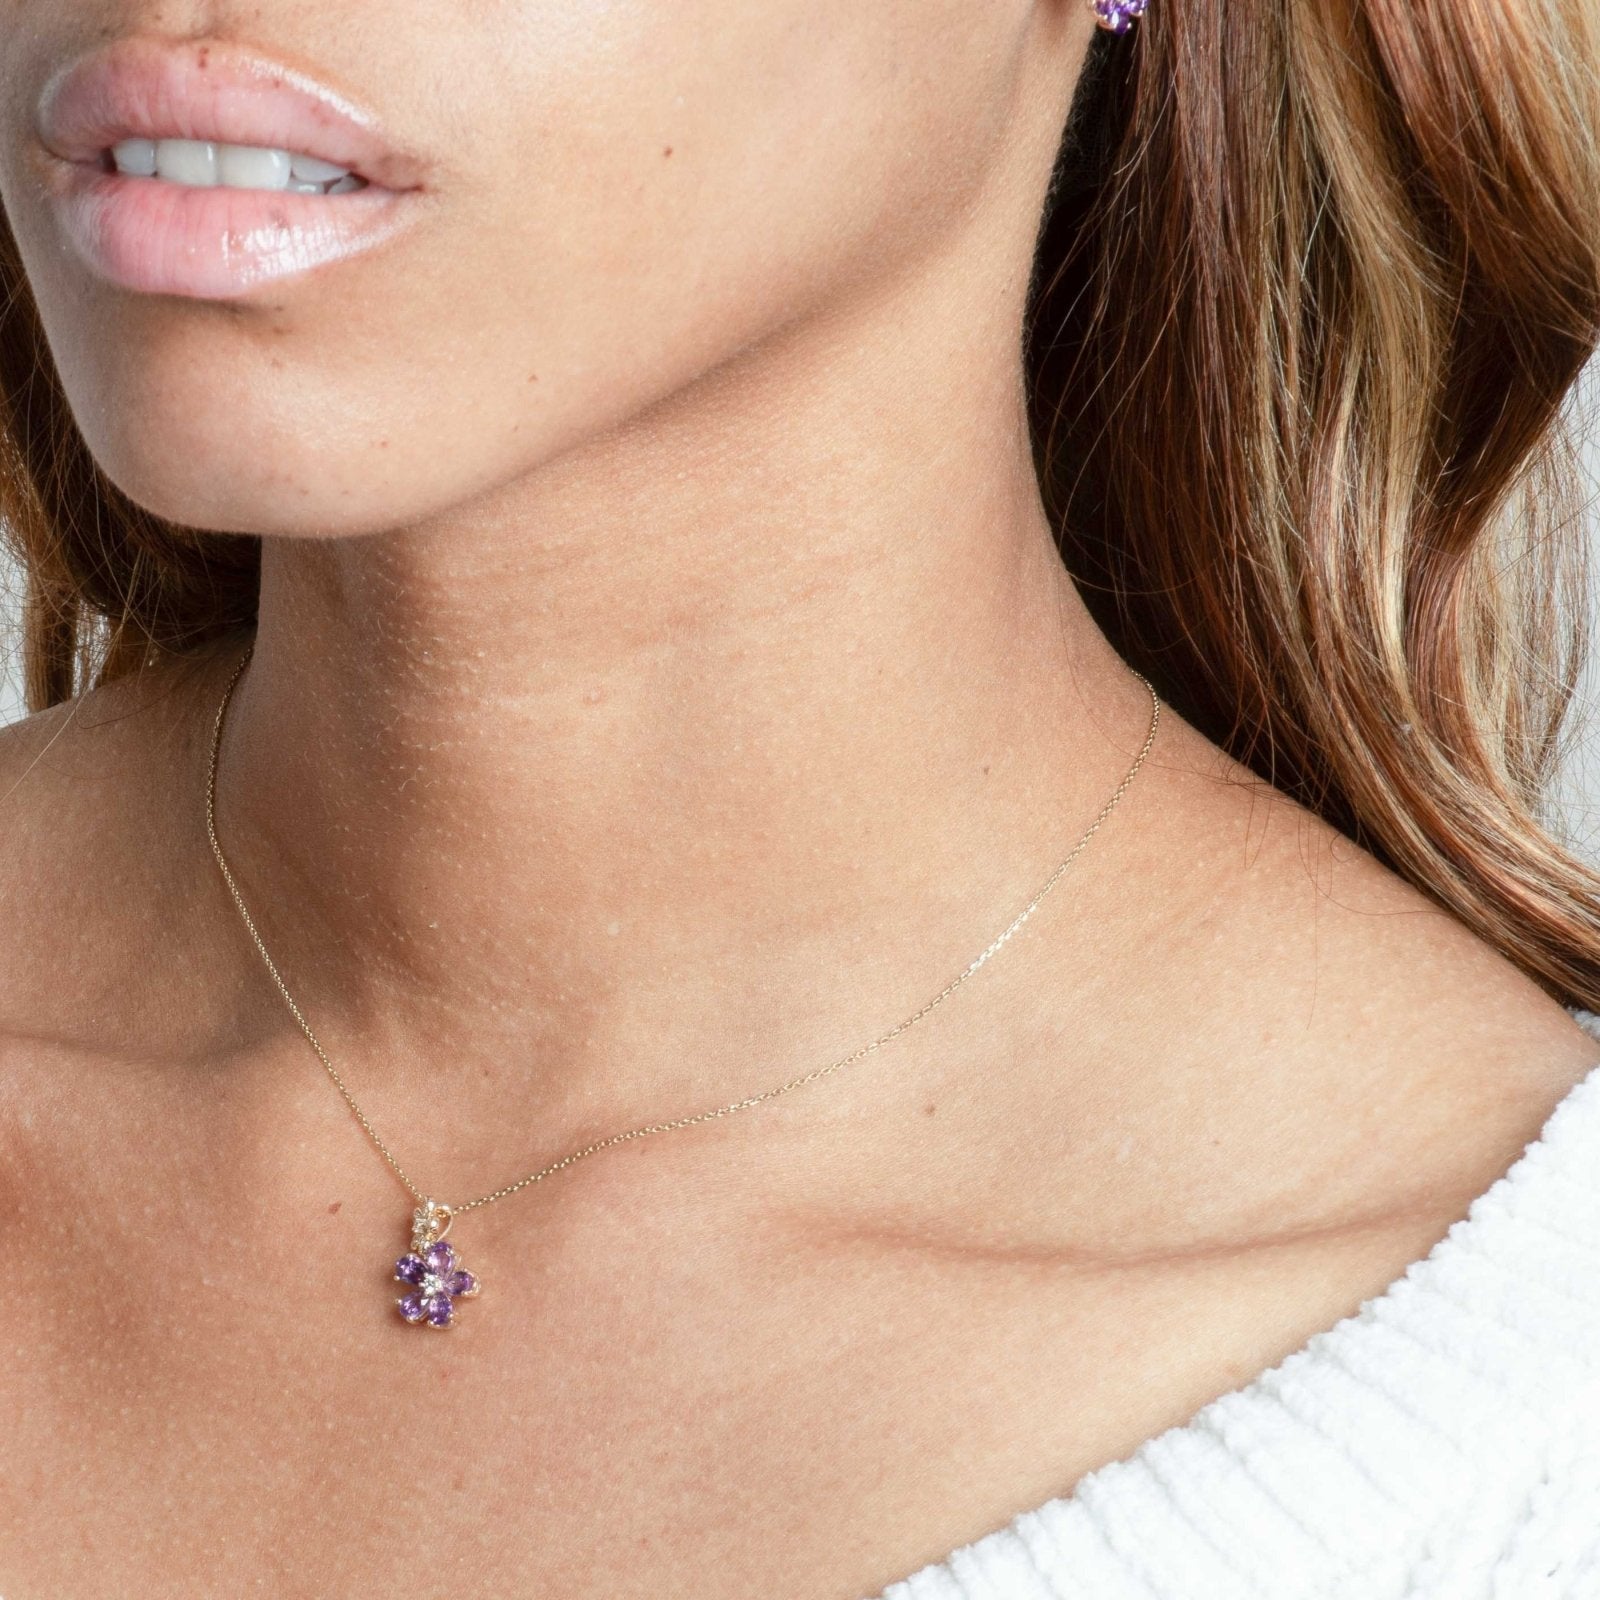 Double Flower Drop Pendant in Amethyst and White Sapphire Necklaces Estella Collection 32733 10k Amethyst Birthstone #tag4# #tag5# #tag6# #tag7# #tag8# #tag9# #tag10#